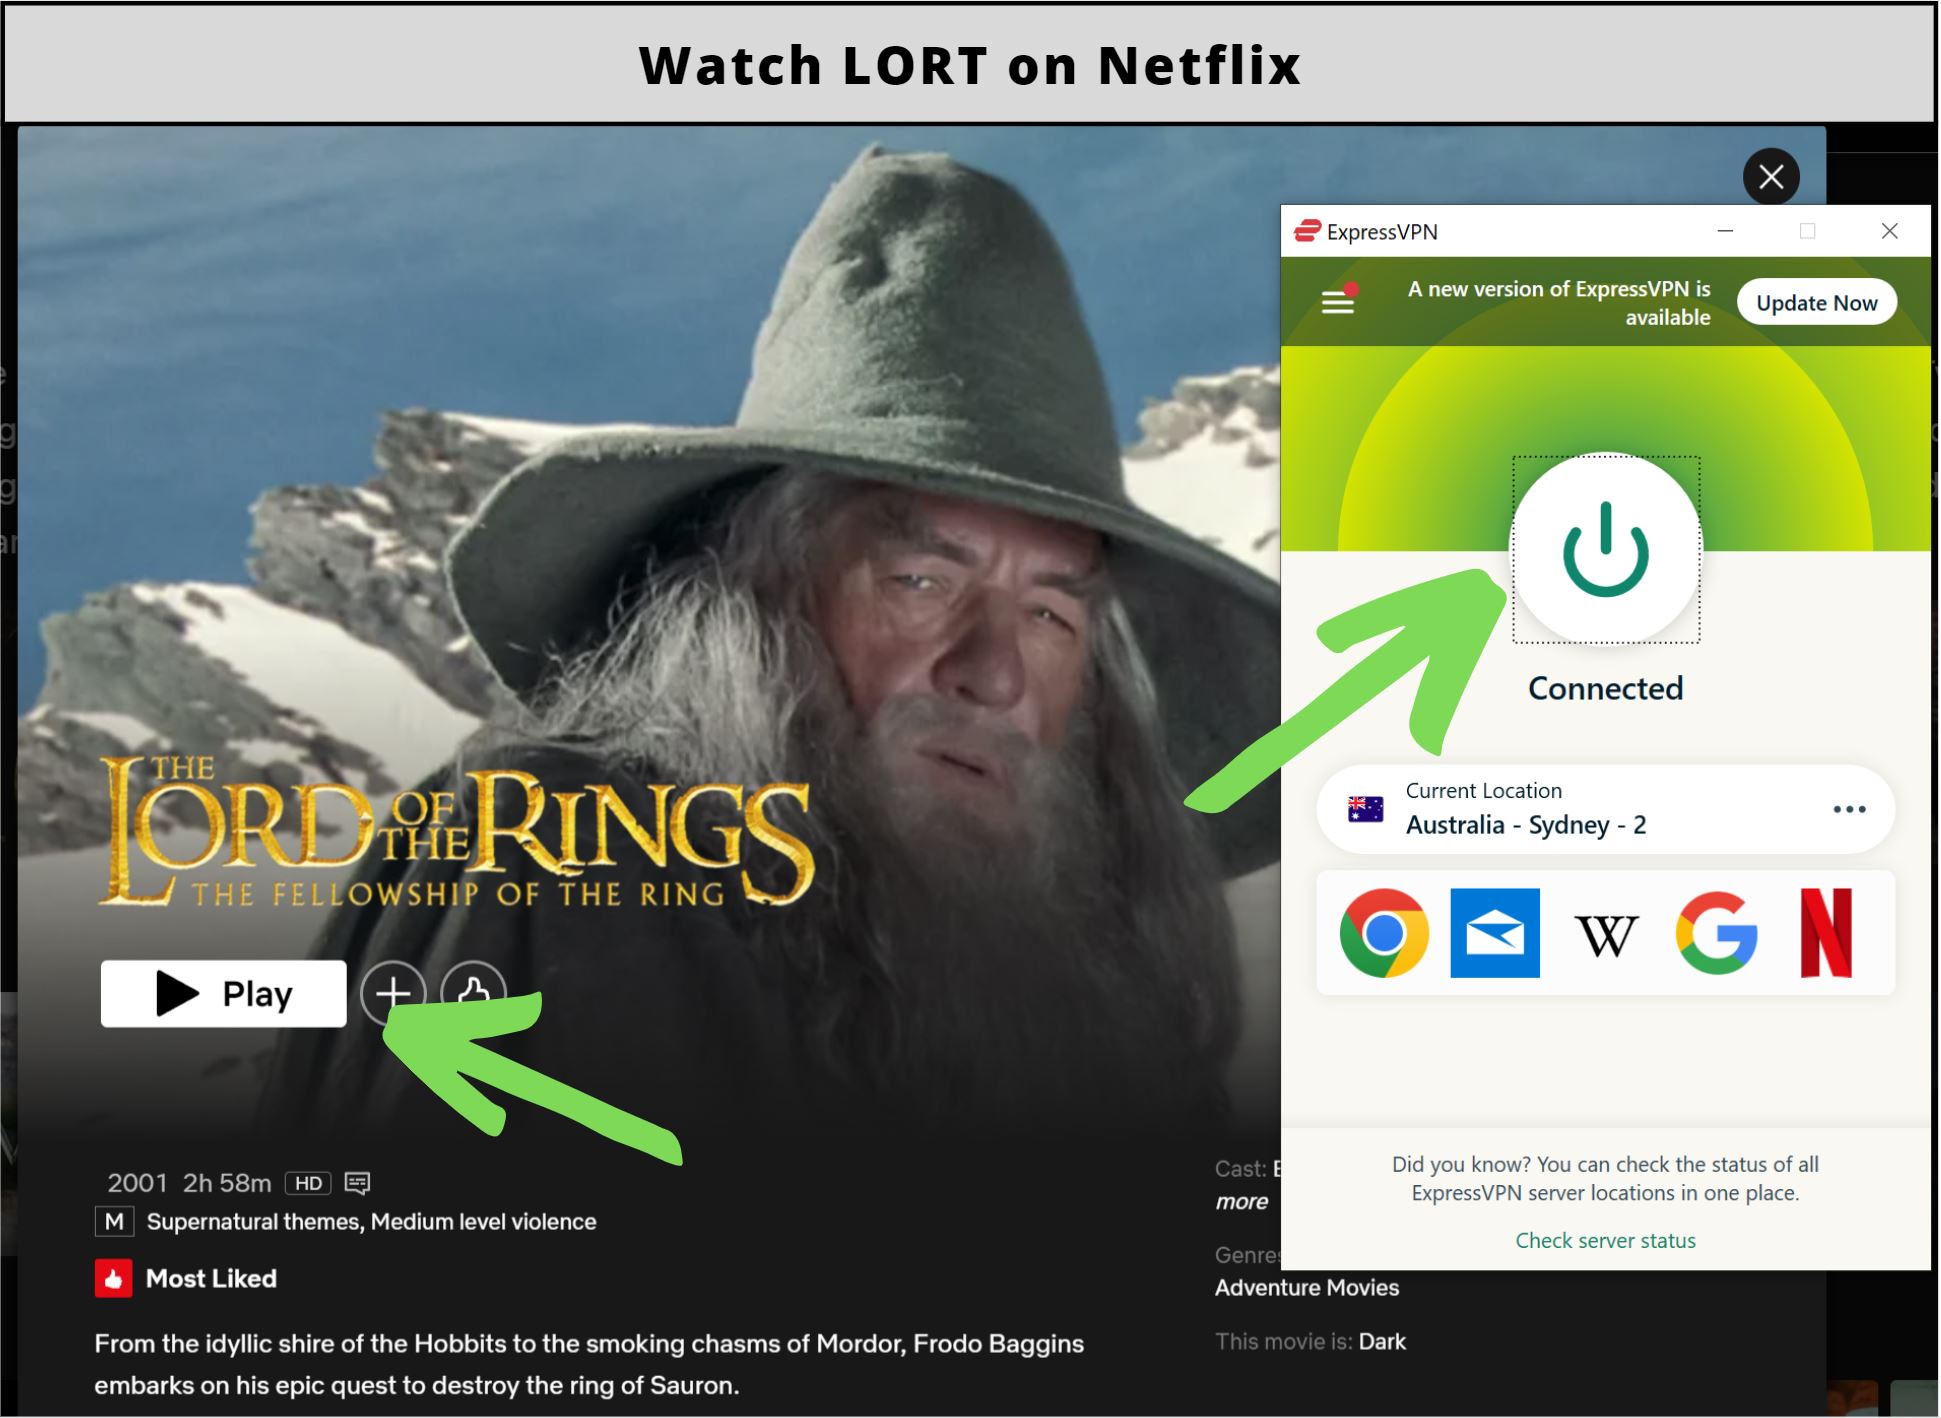 How To Watch Lord of the Rings on Netflix